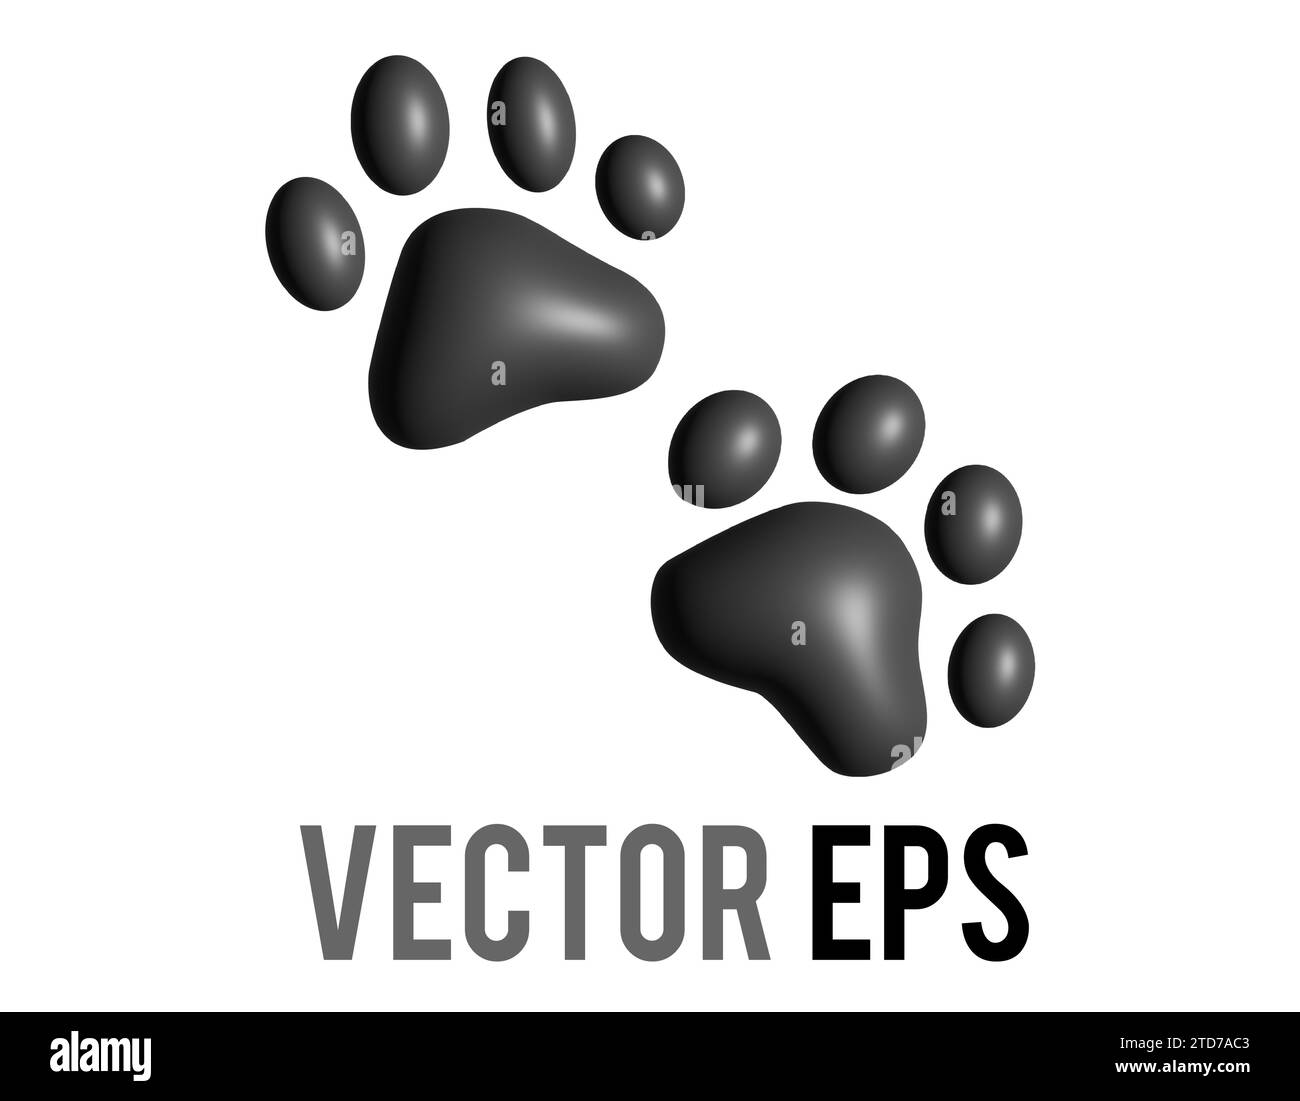 The isolated pair of dark paw prints 3D icon, showing four toes and pad, used for various content concerning pet cats and dogs Stock Vector